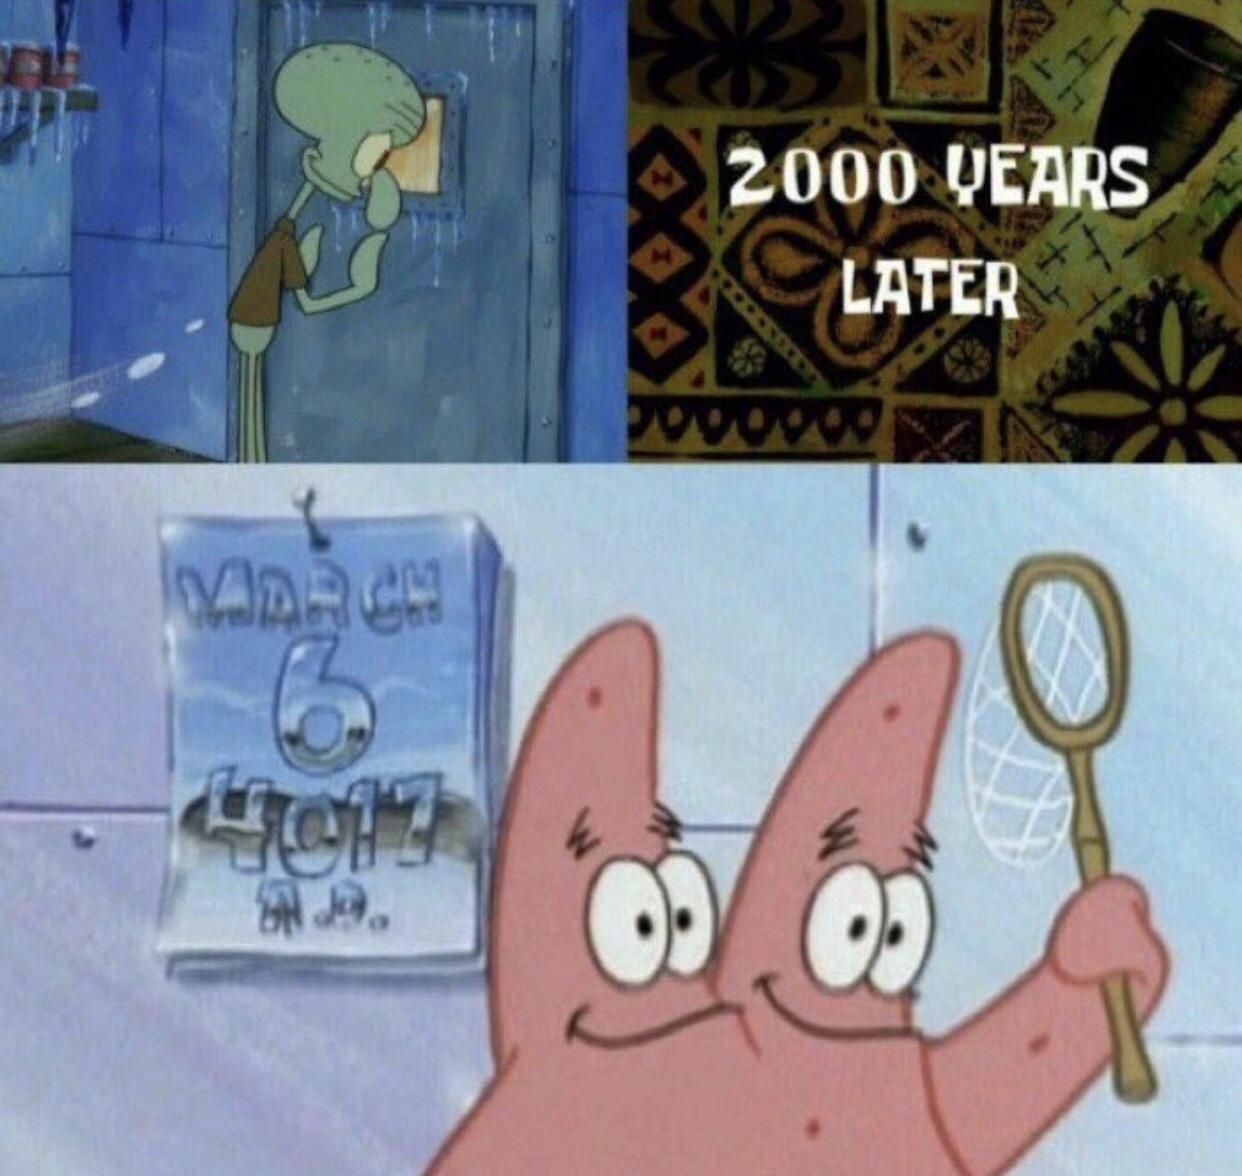 Today, Squidward will lock himself in the freezer to see the wonders of the future